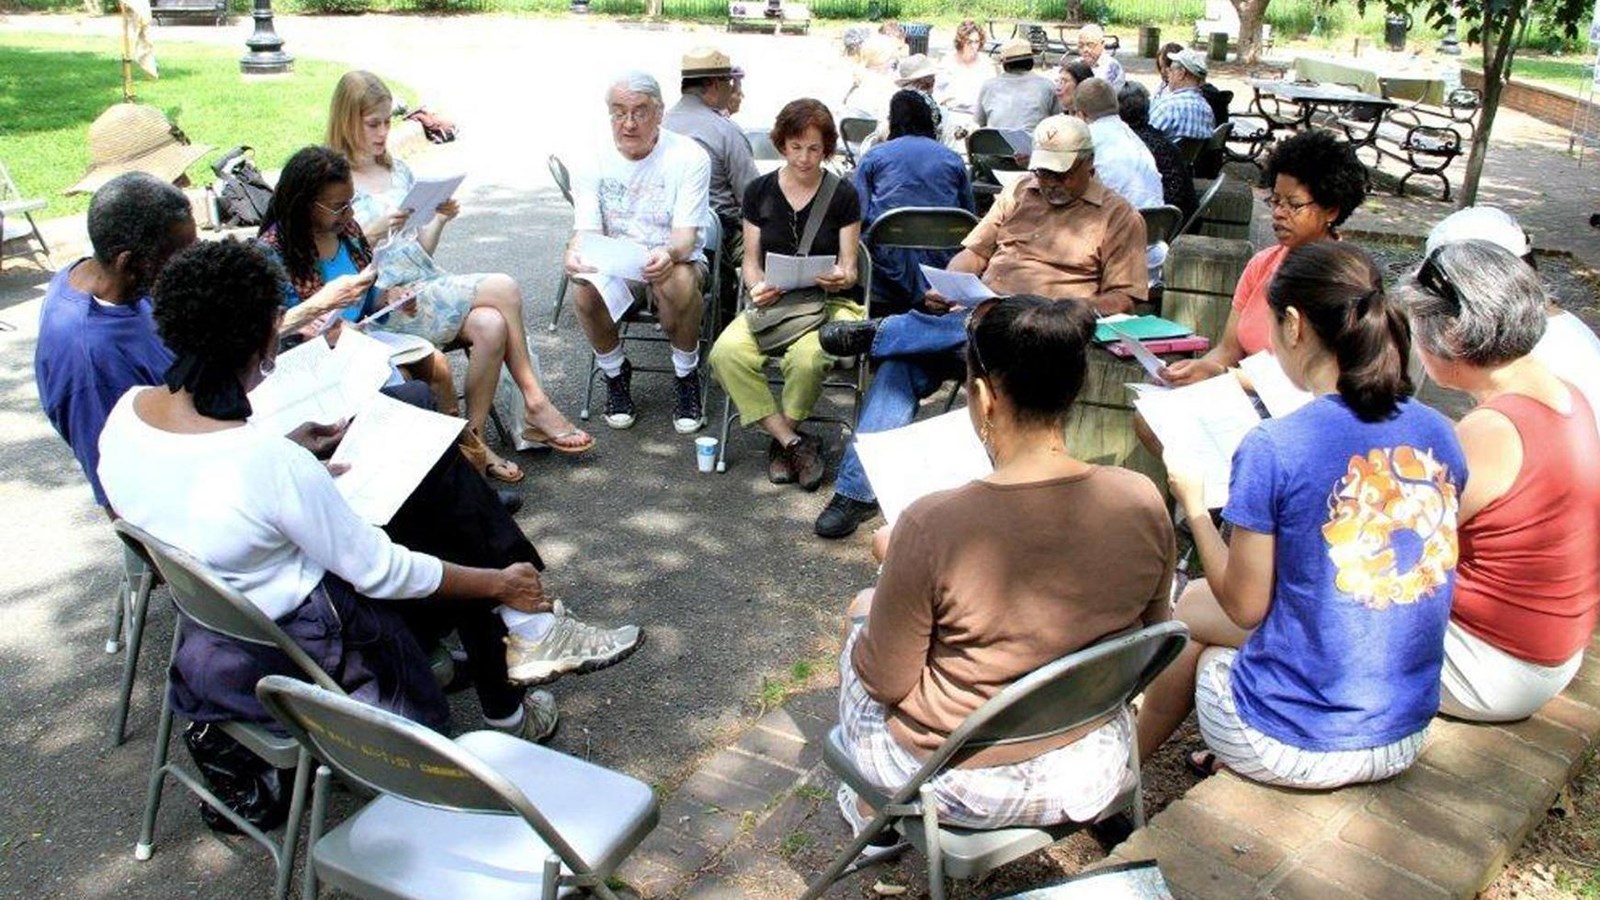 Groups of people sit in circles of chairs viewing pieces of paper.